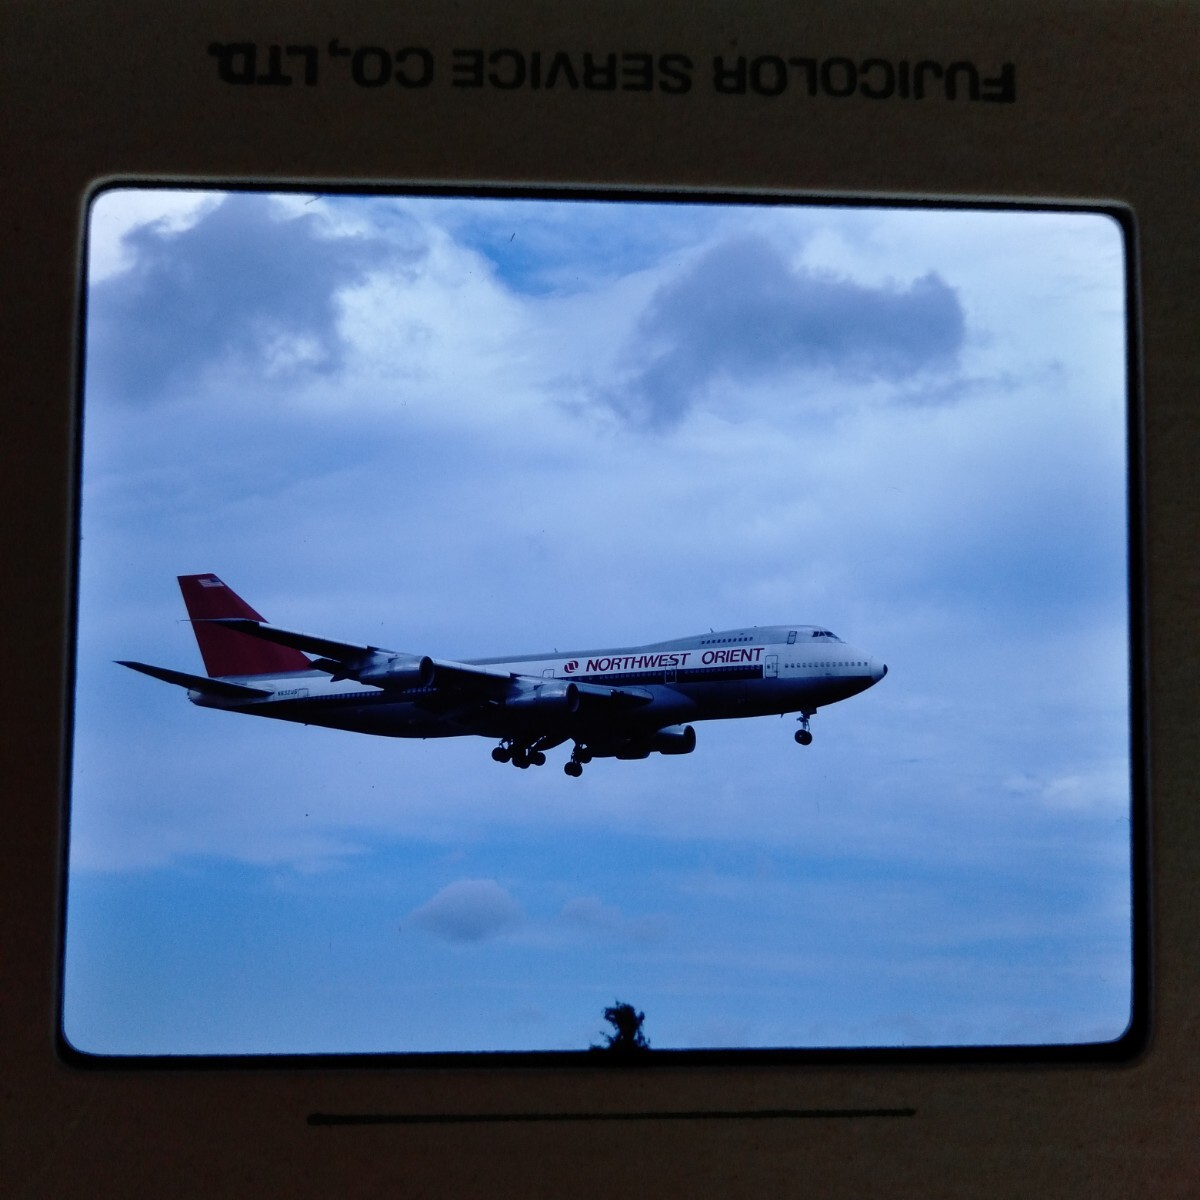 ne060 aircraft Northwest Airlines bo- wing 747nega camera mania . warehouse goods delivery collection 6 sheets together 